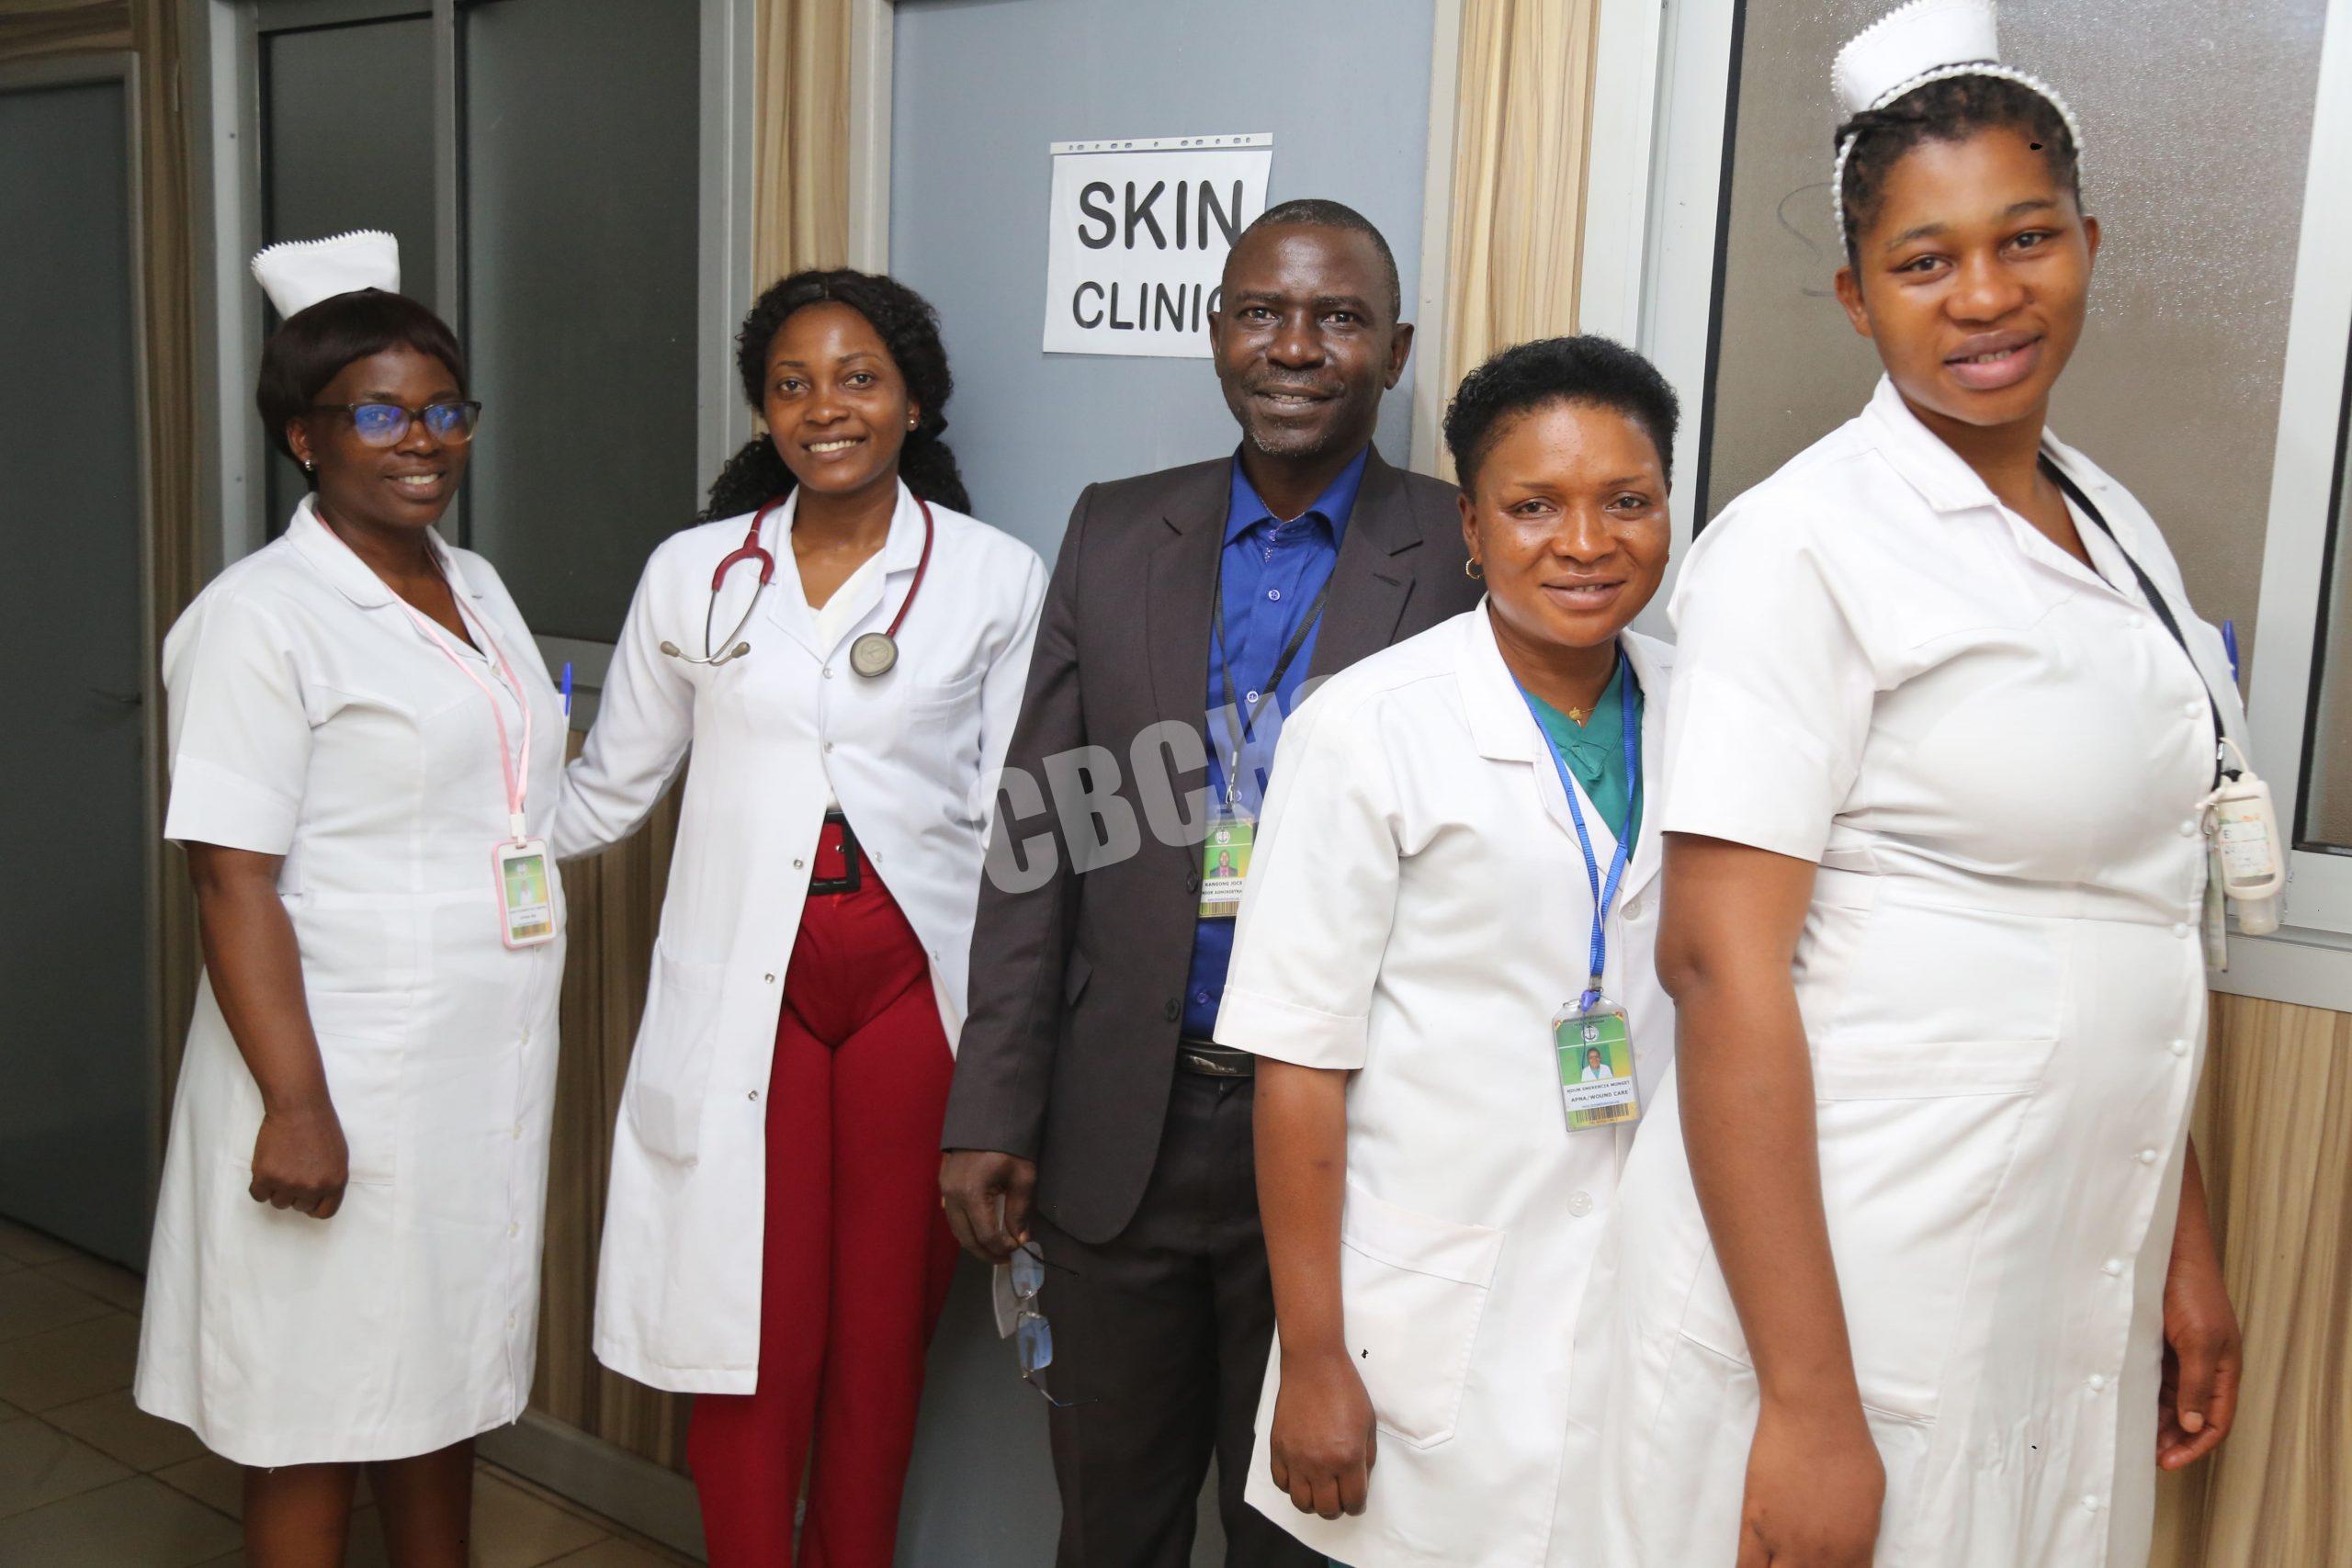 Skincare Clinic Team excited to bring specialized care to Bamenda